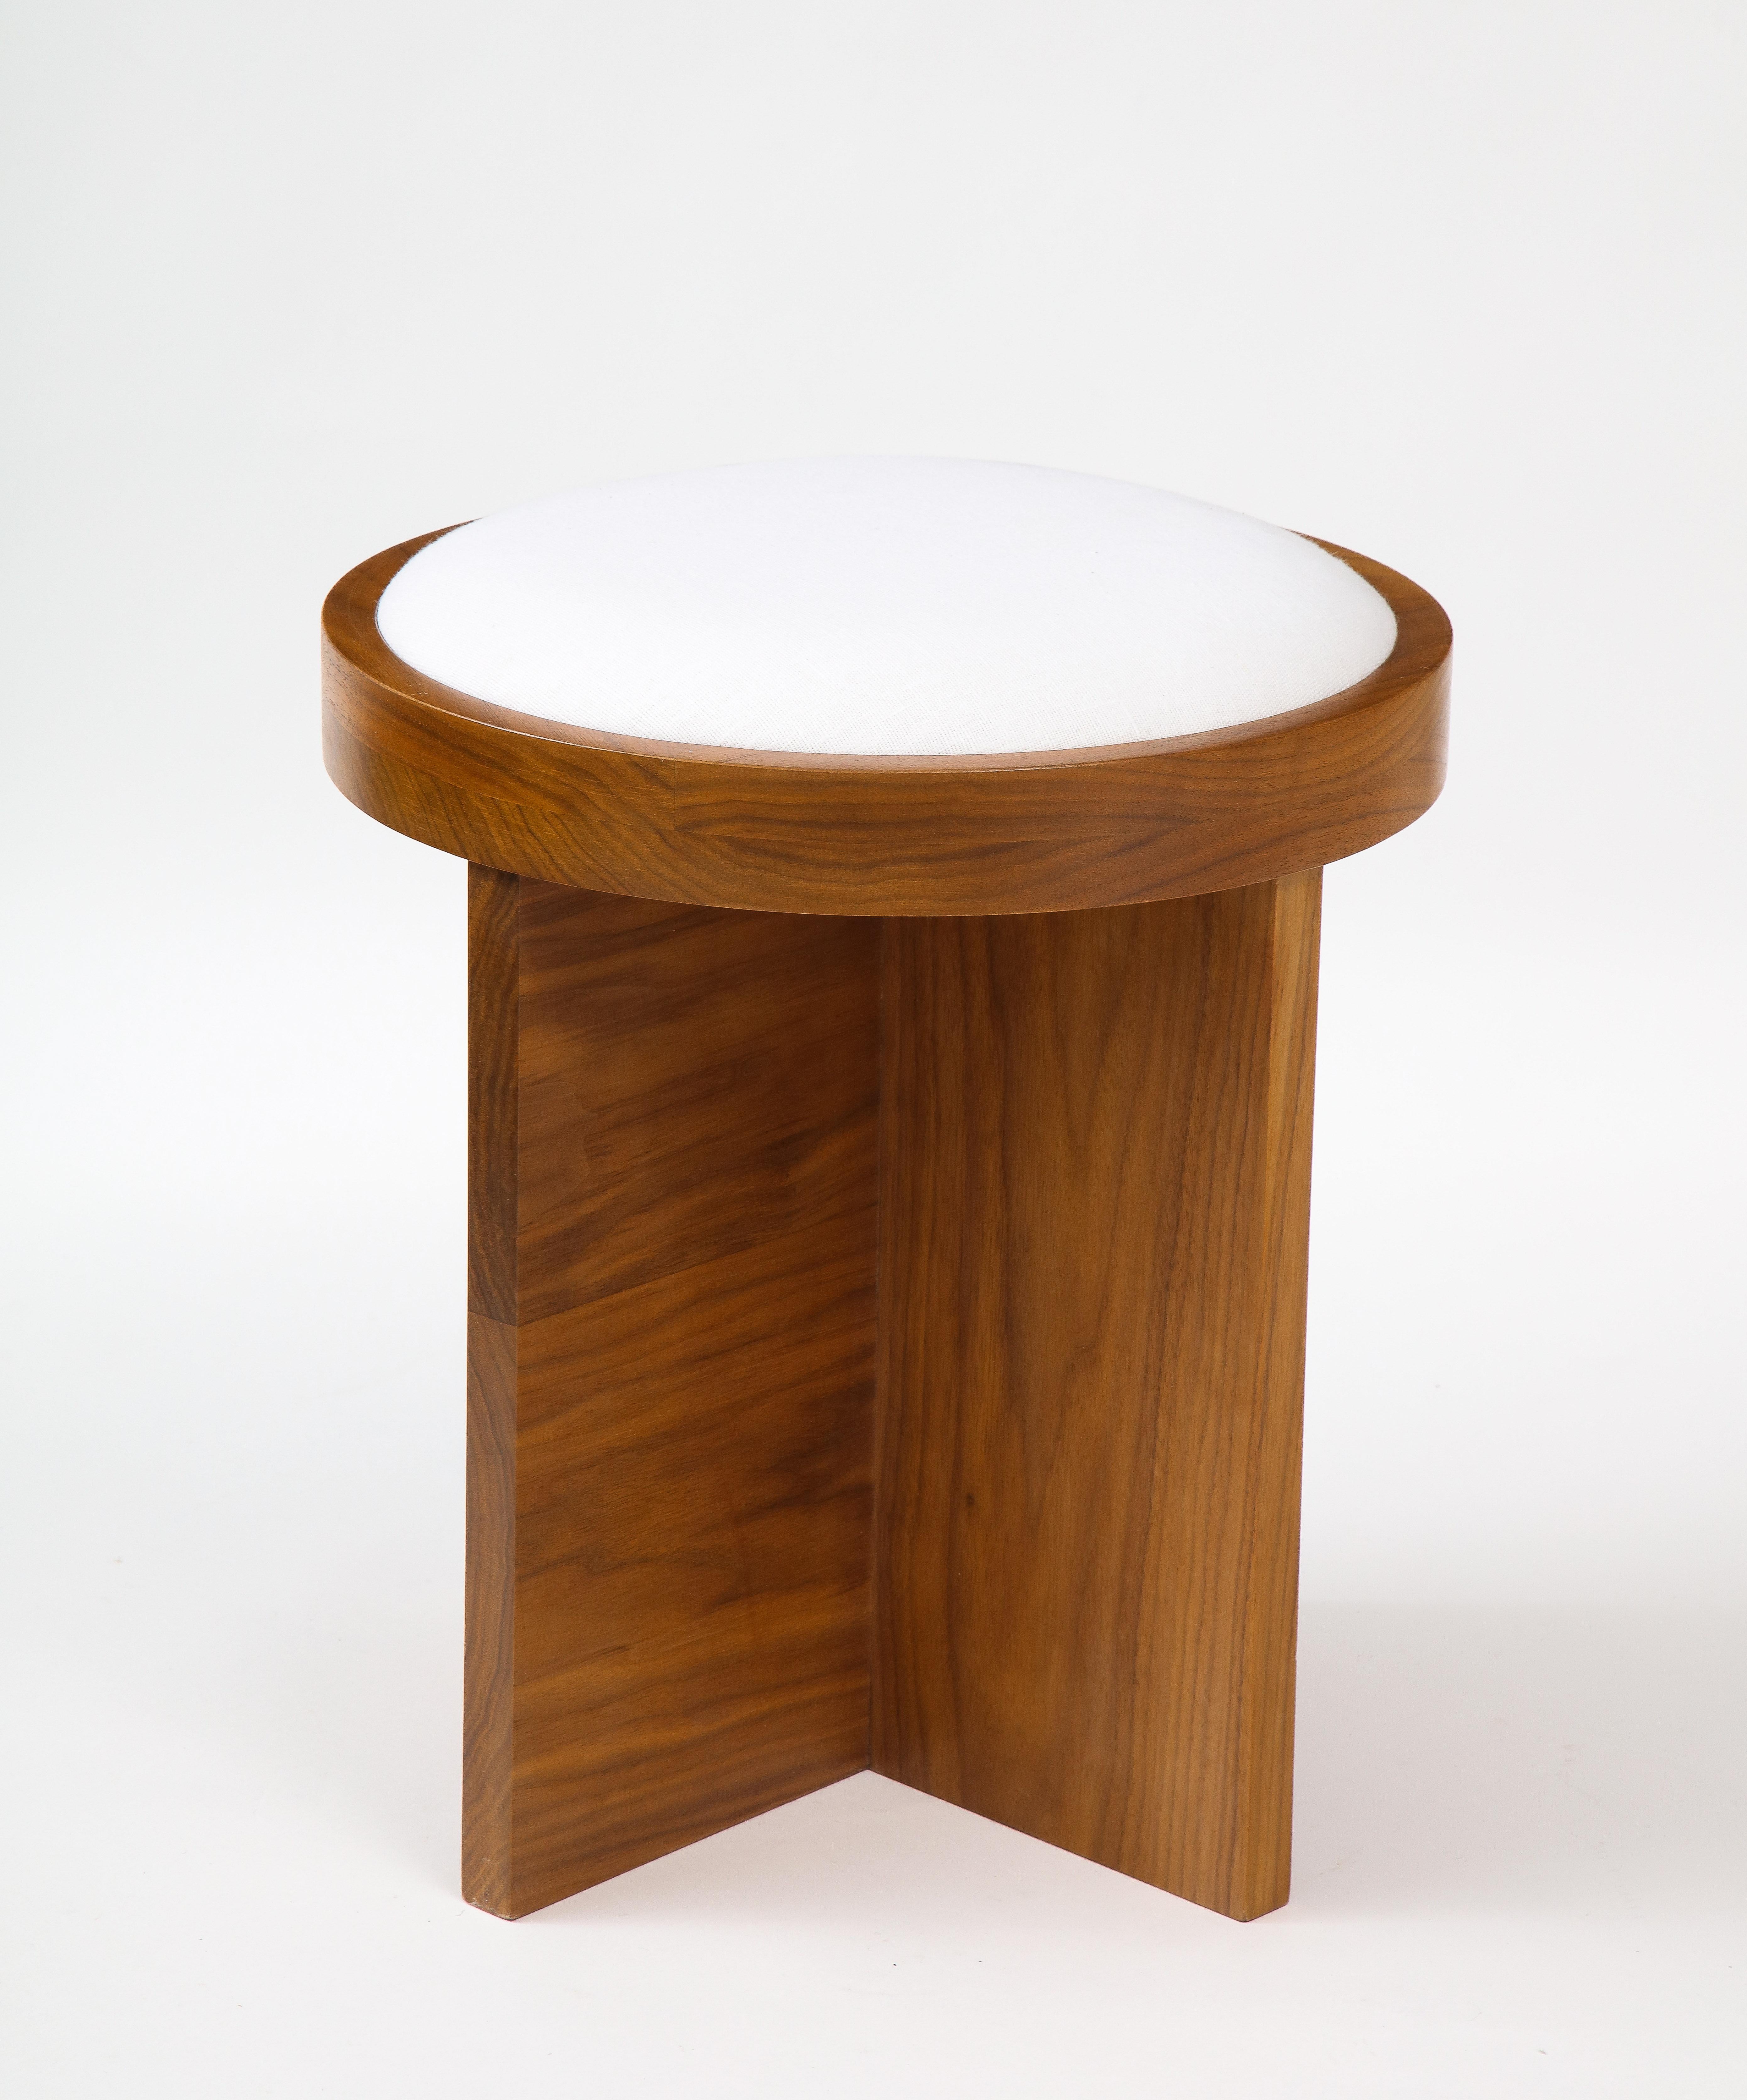 Custom made to order solid walnut stool (or side table) with inset linen cushioned top (COM) in the French 40's style.